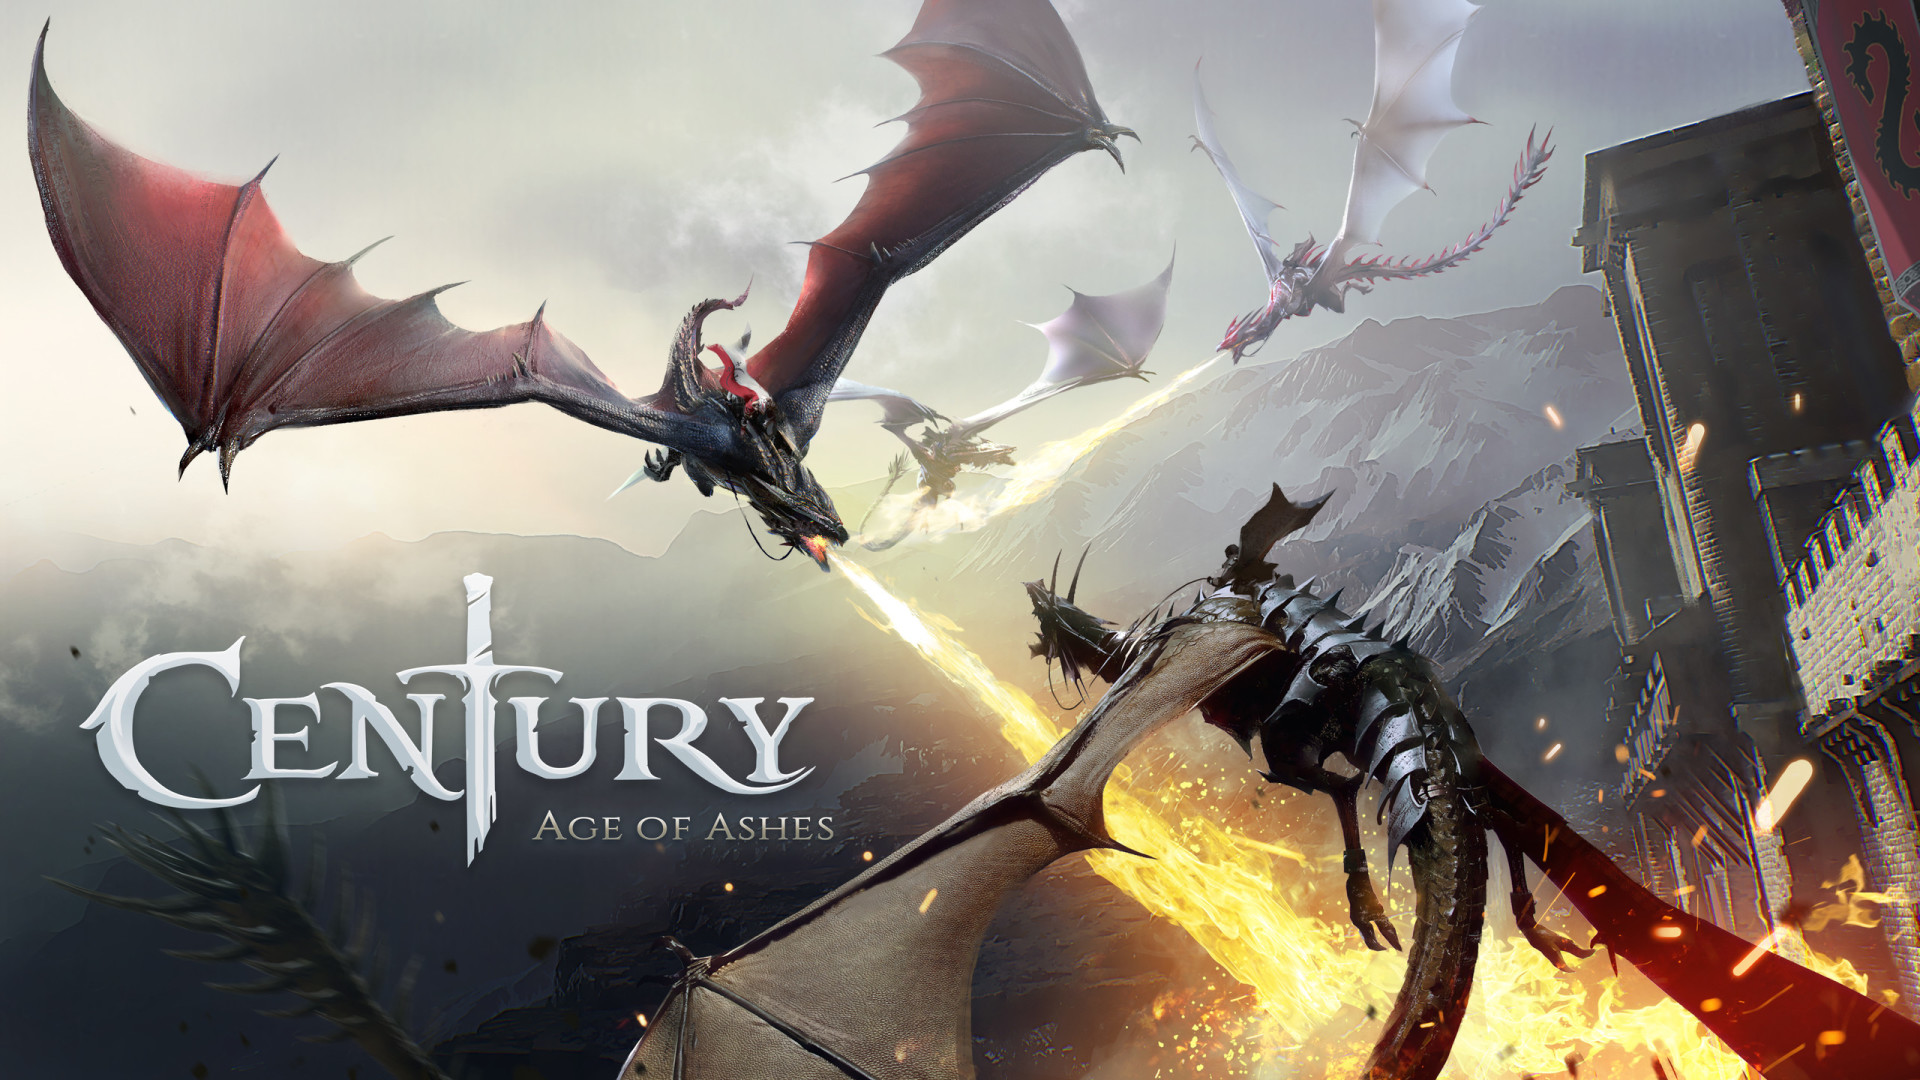 century: age of ashes ps4 release date